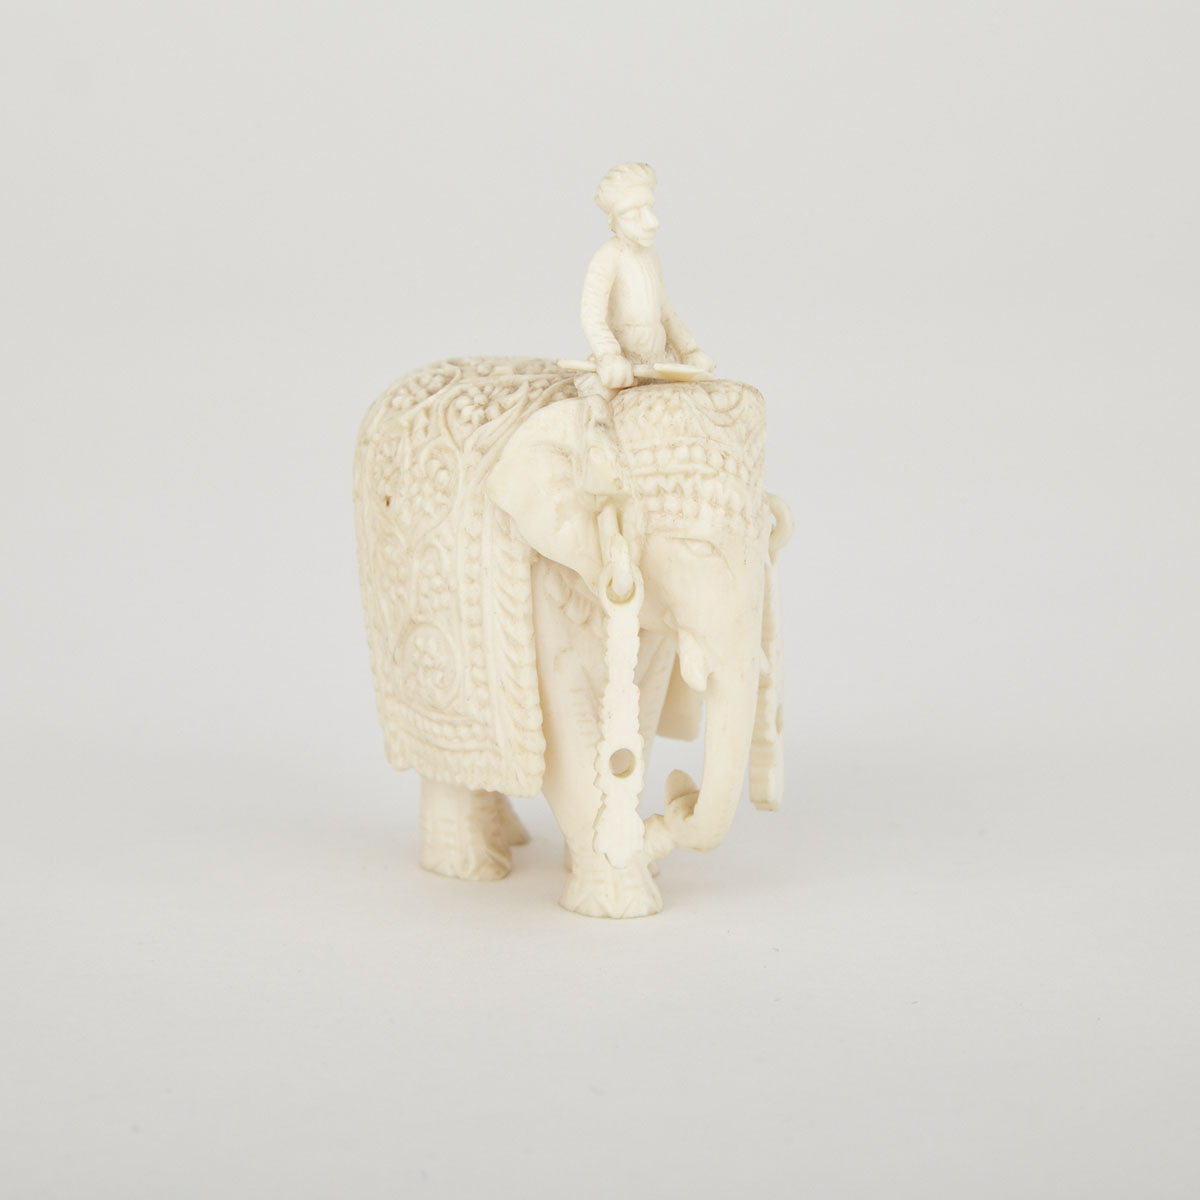 Carved Indian Ivory Figure of an Elephant, C. 1940